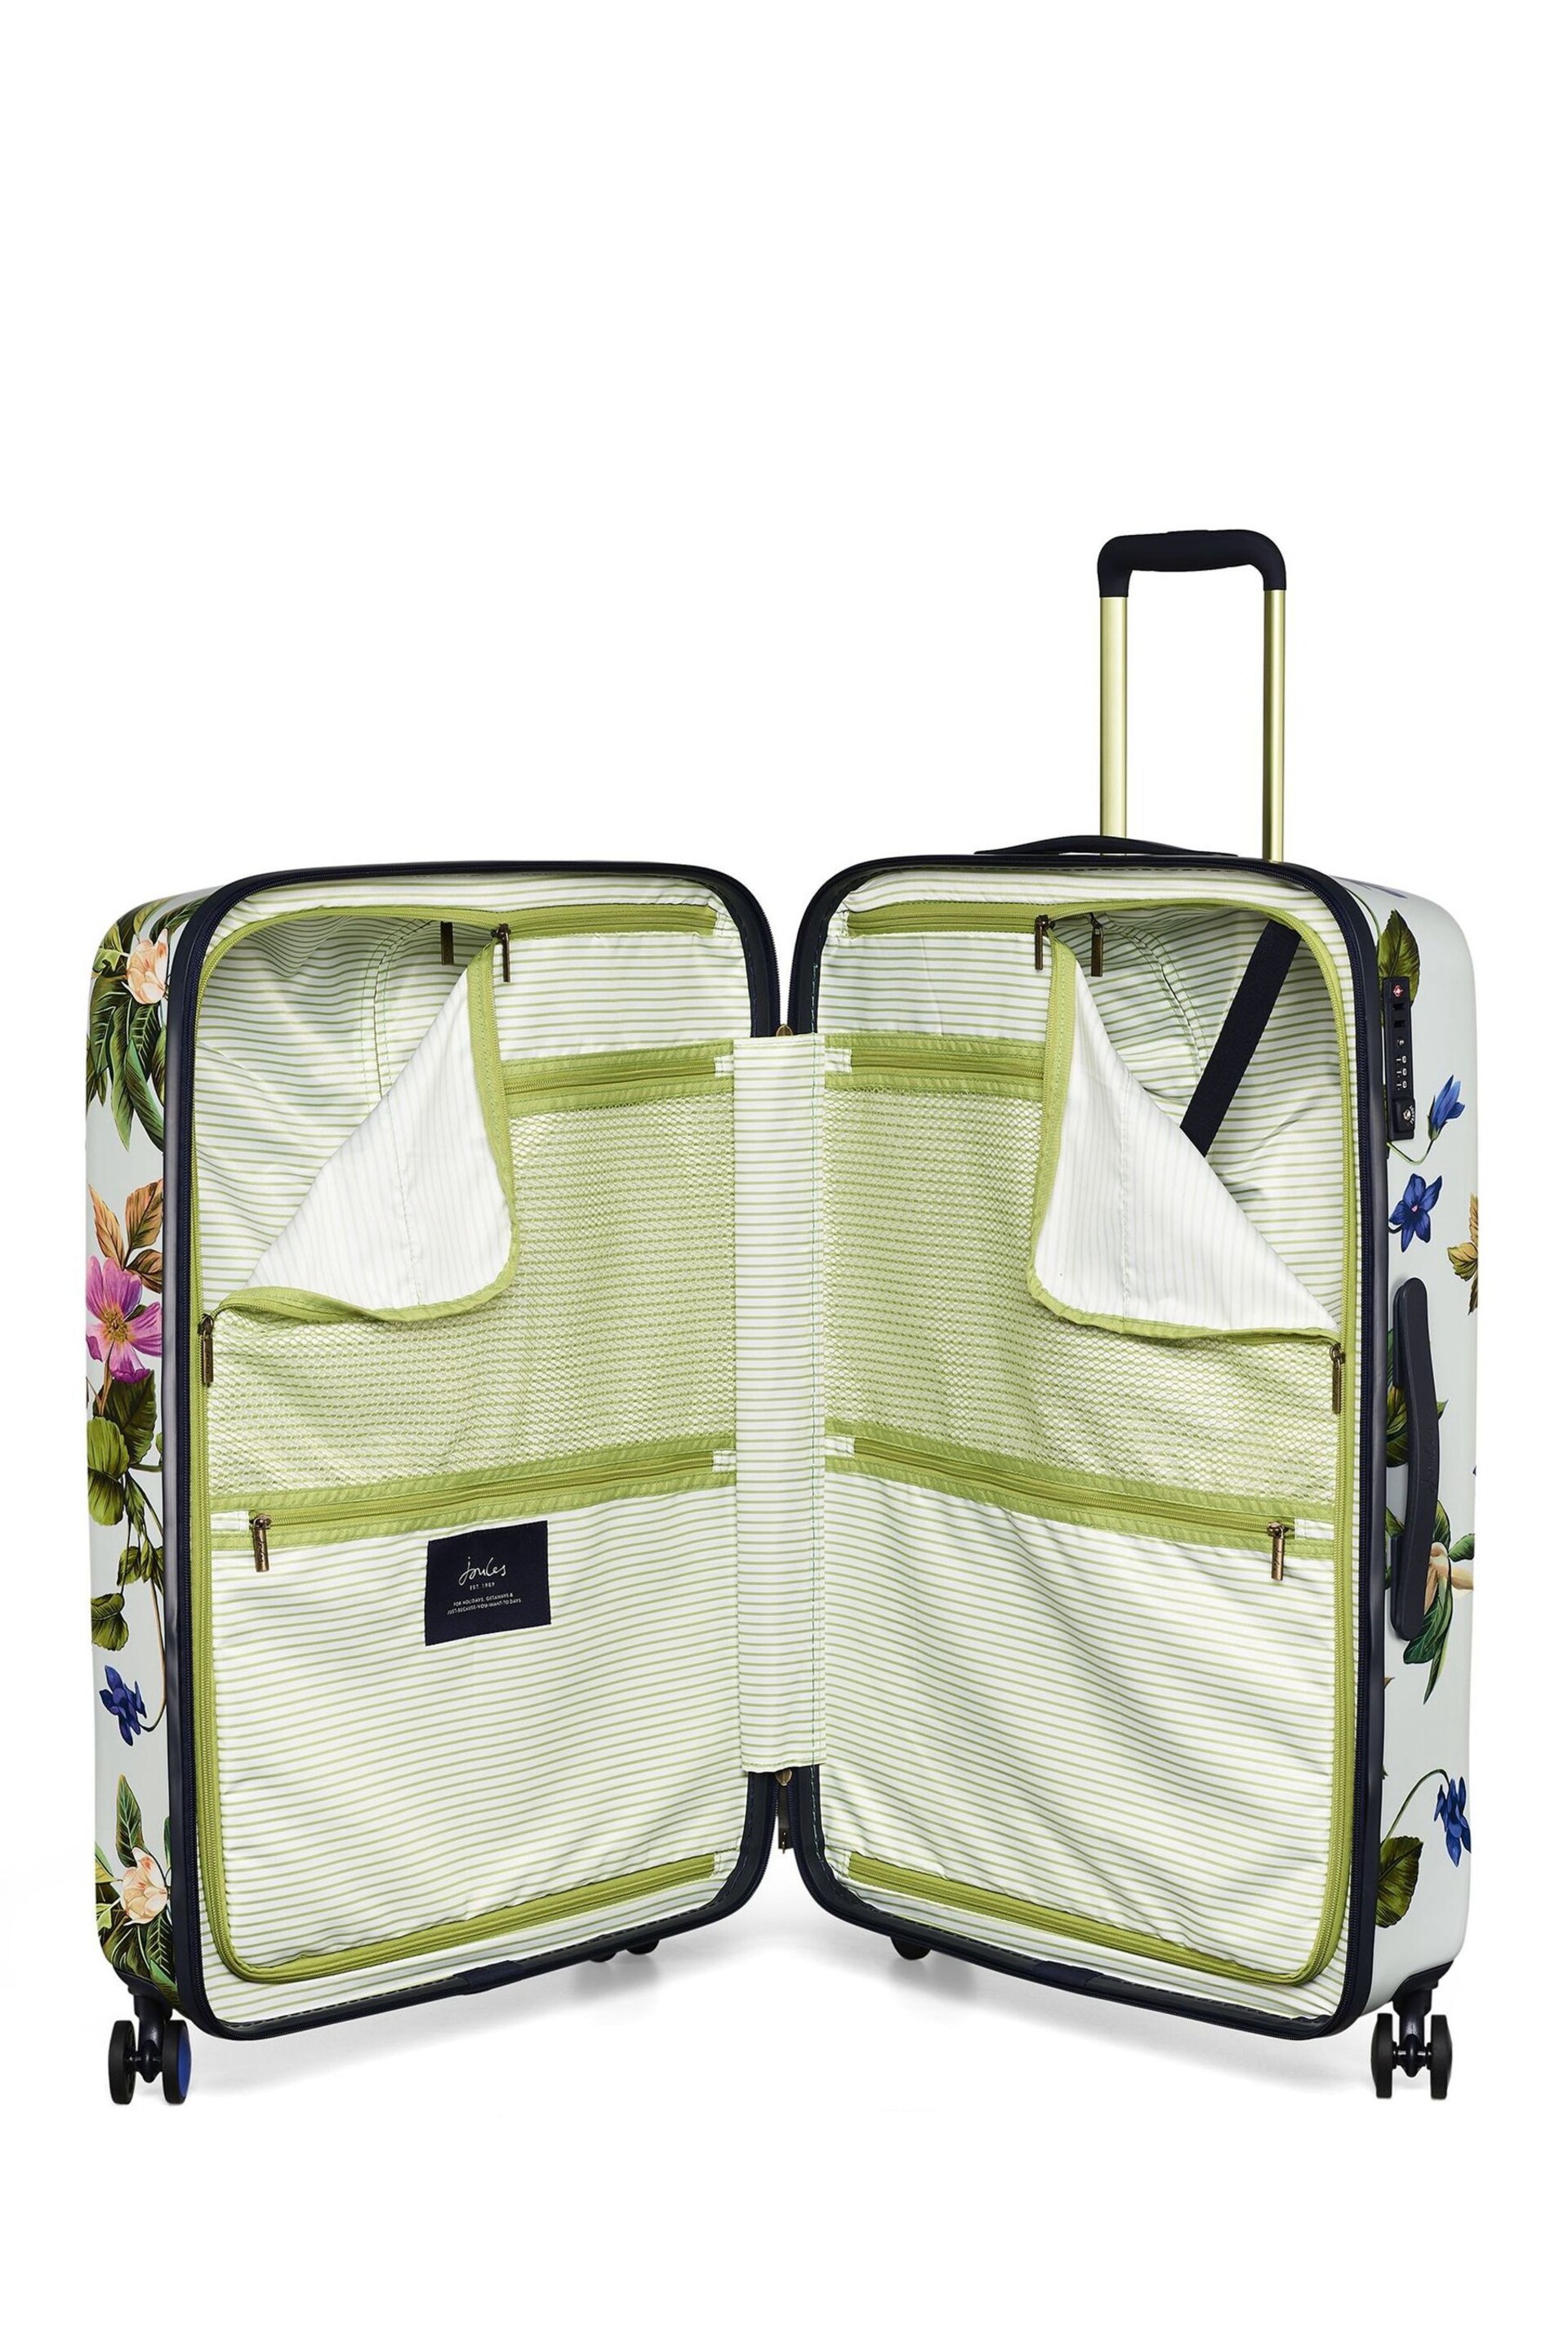 Joules Silver Large Silver Spring Wood Botanical Suitcase - Image 2 of 2